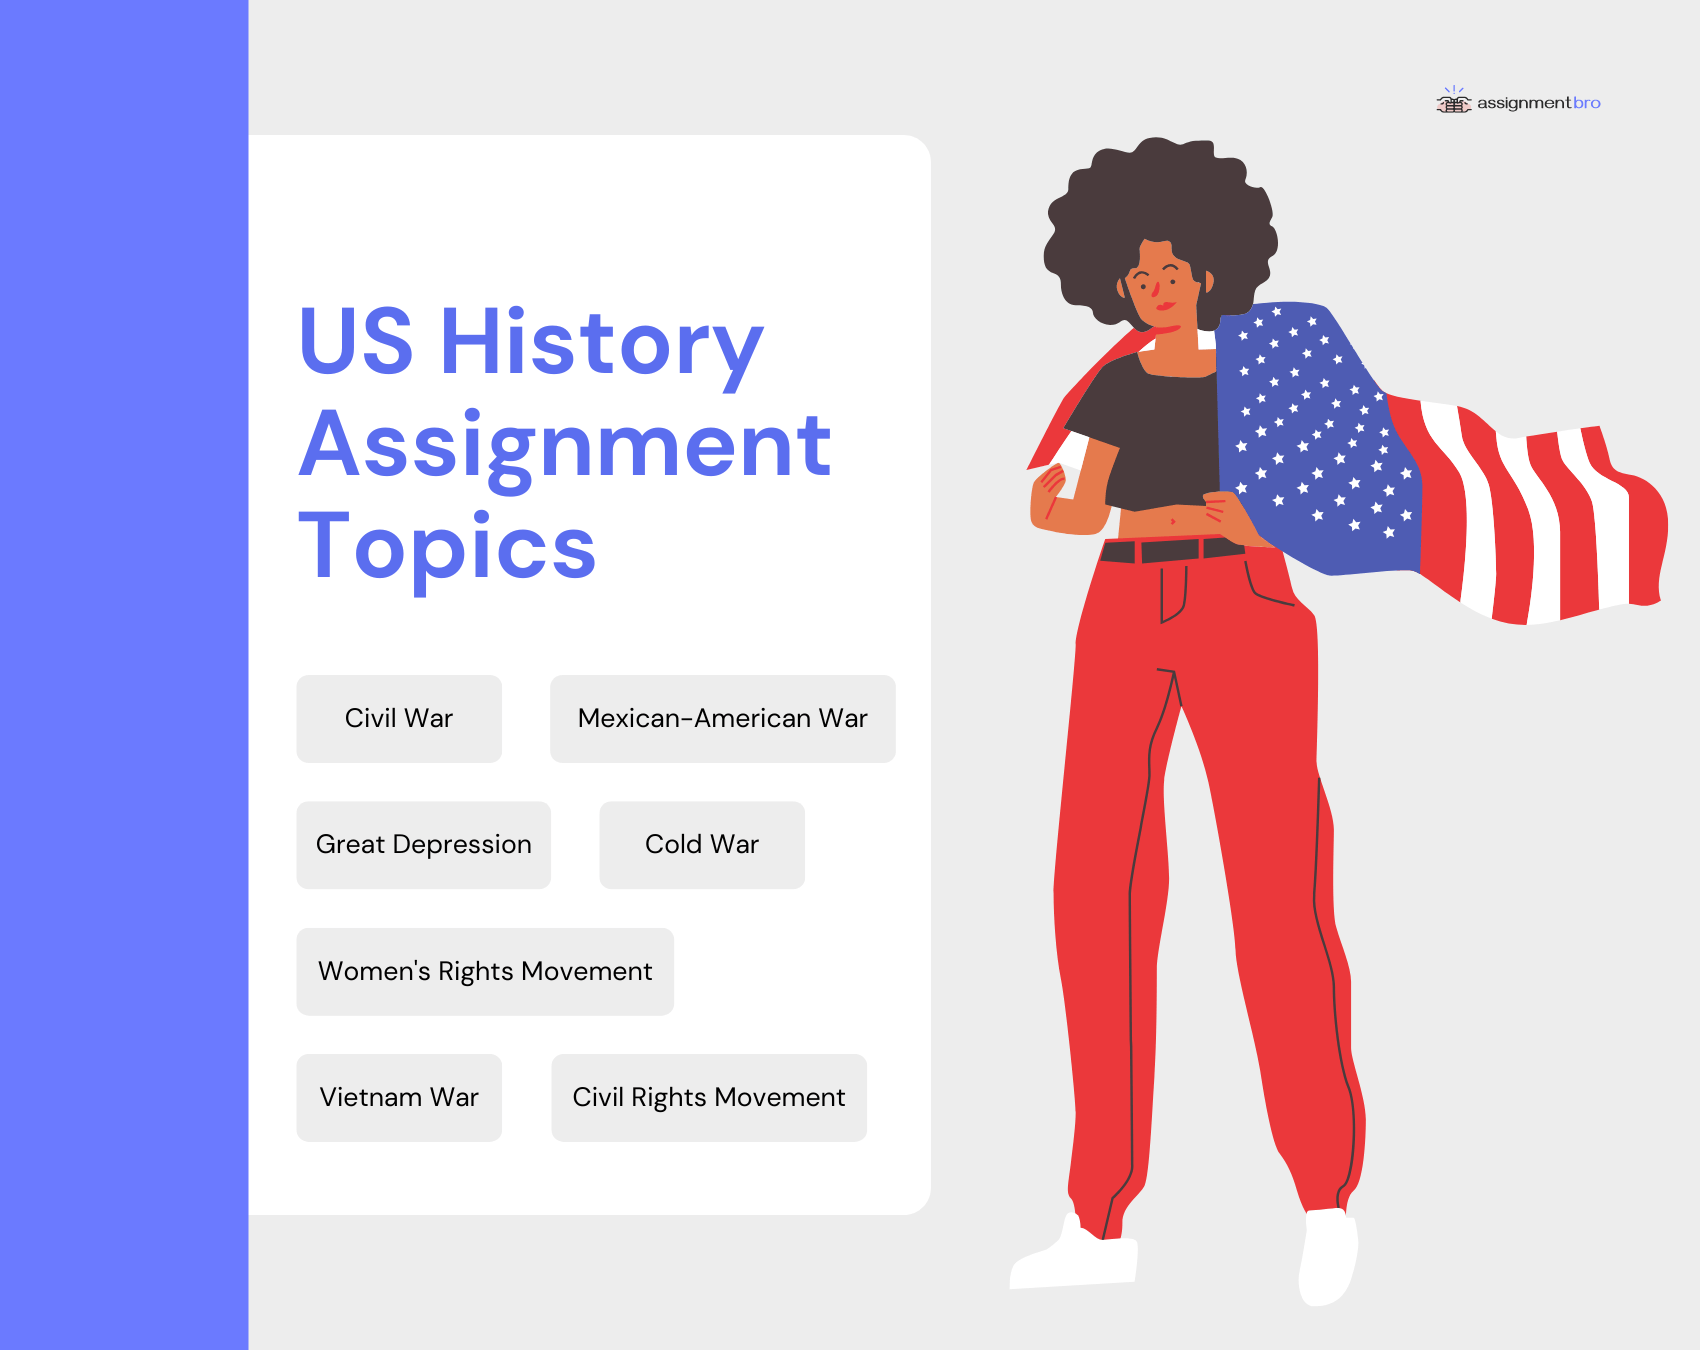 the US history assignment topics